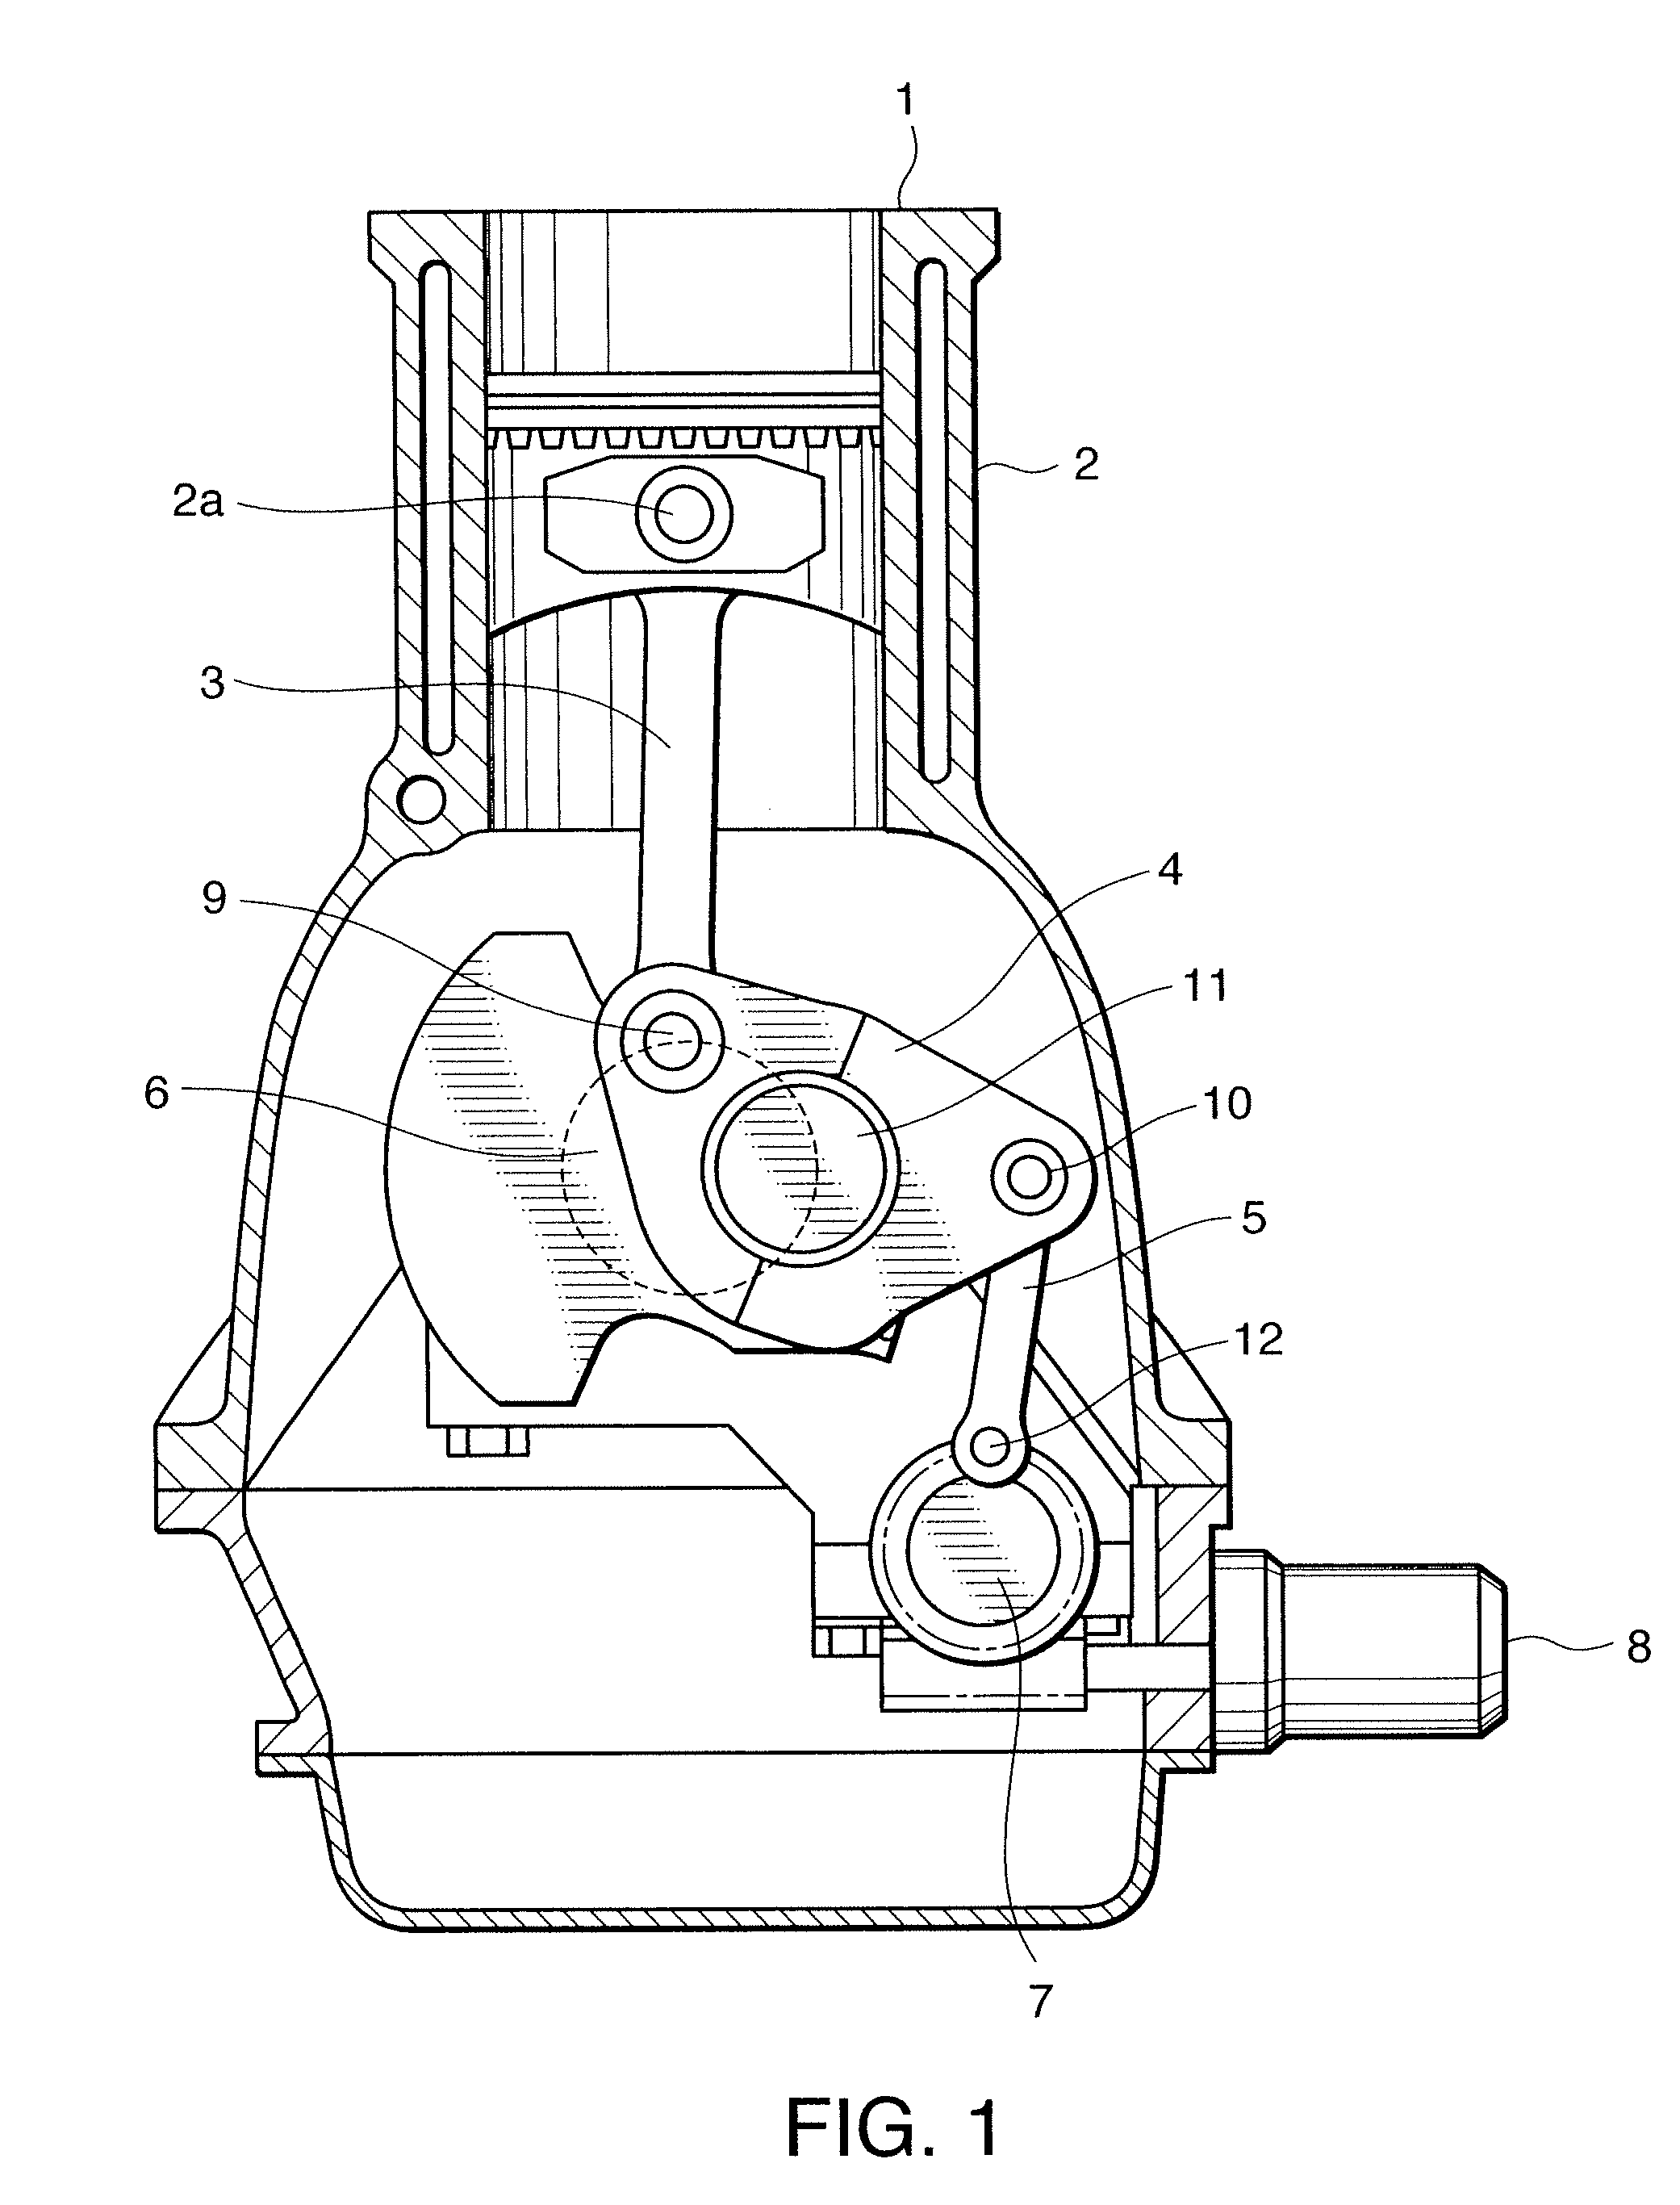 Bearing structure for variable-compression-ratio internal combustion engine